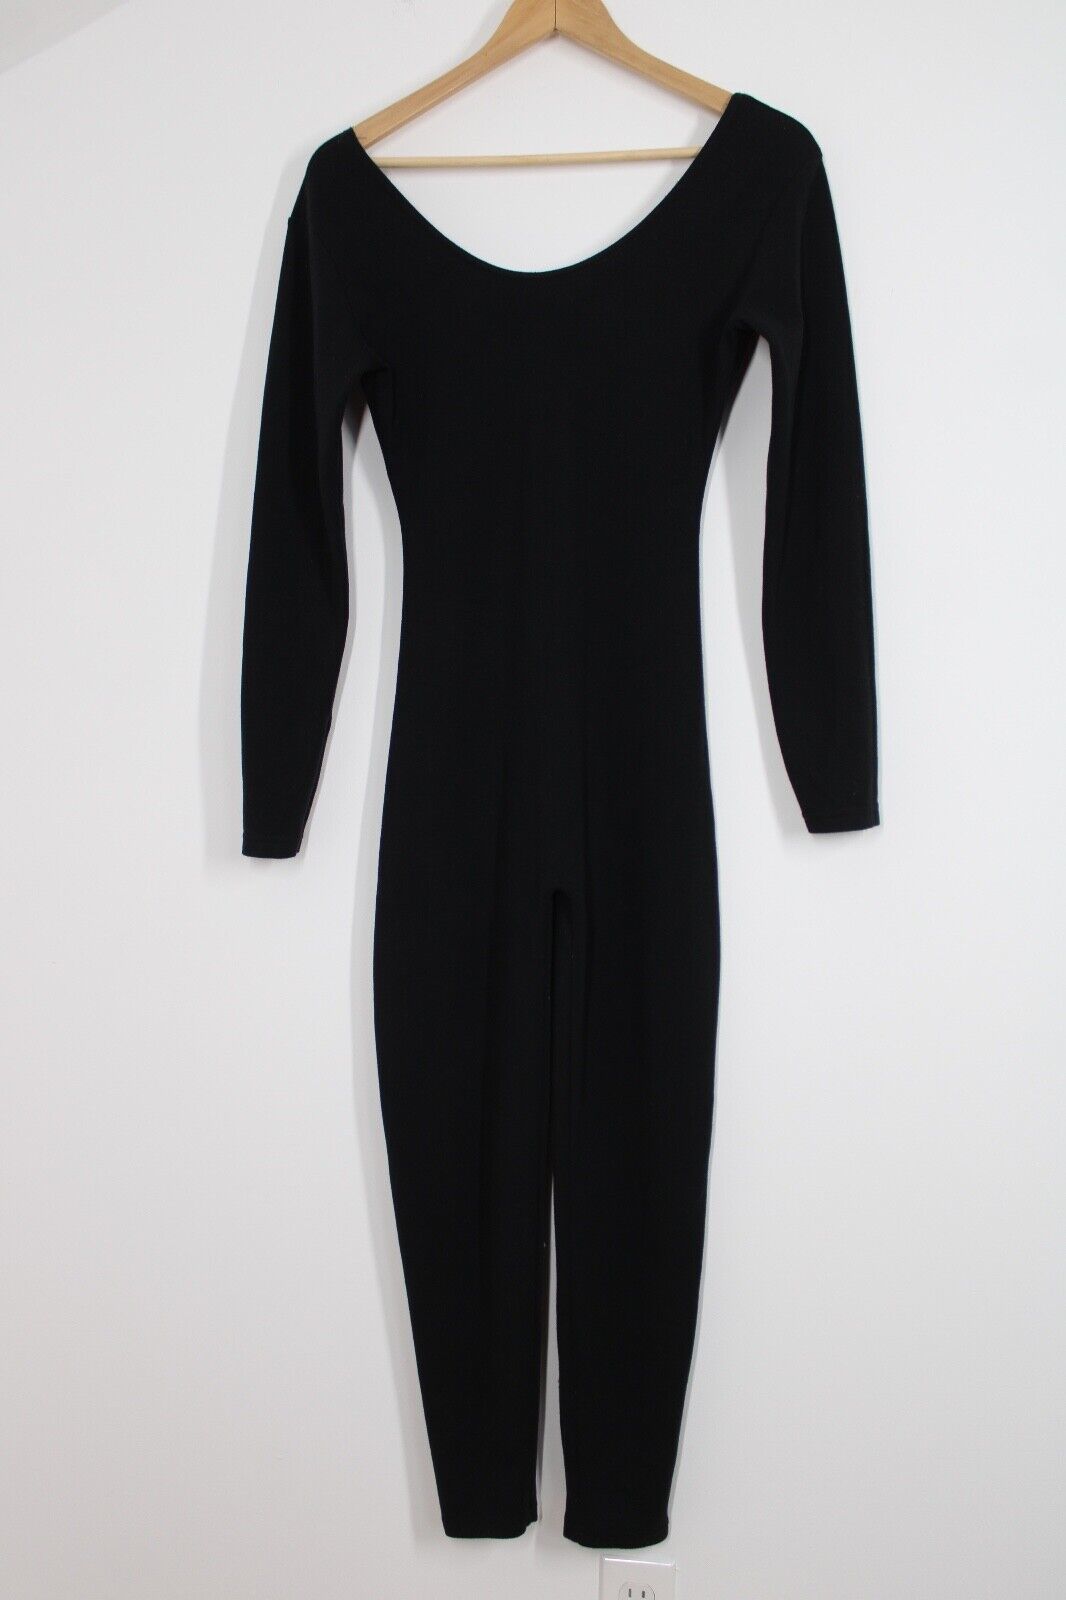 Primary image for Vtg Express Tricot S Black Stretch Knit Scoop Neck Fitted One-Piece Bodysuit